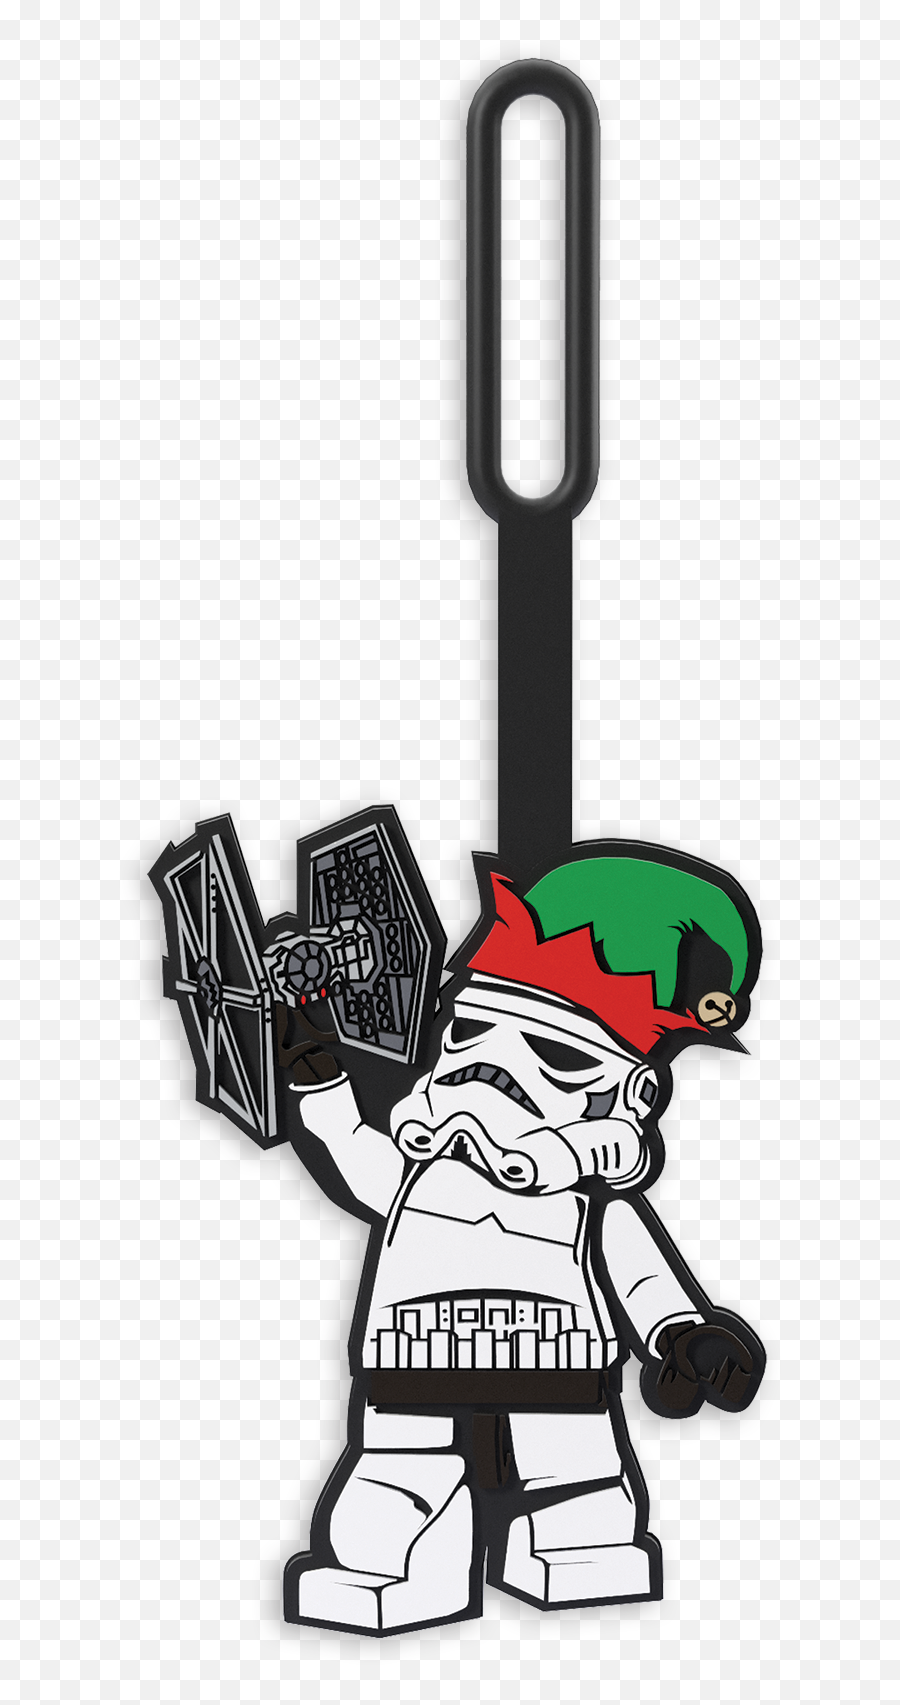 Accessories Extras Official Lego Shop Us Page 2 - Lego Christmas Star Wars Elf Stormtrooper Silicone Luggage Bag Tag New With Tag Emoji,Darth Maul Emoticon